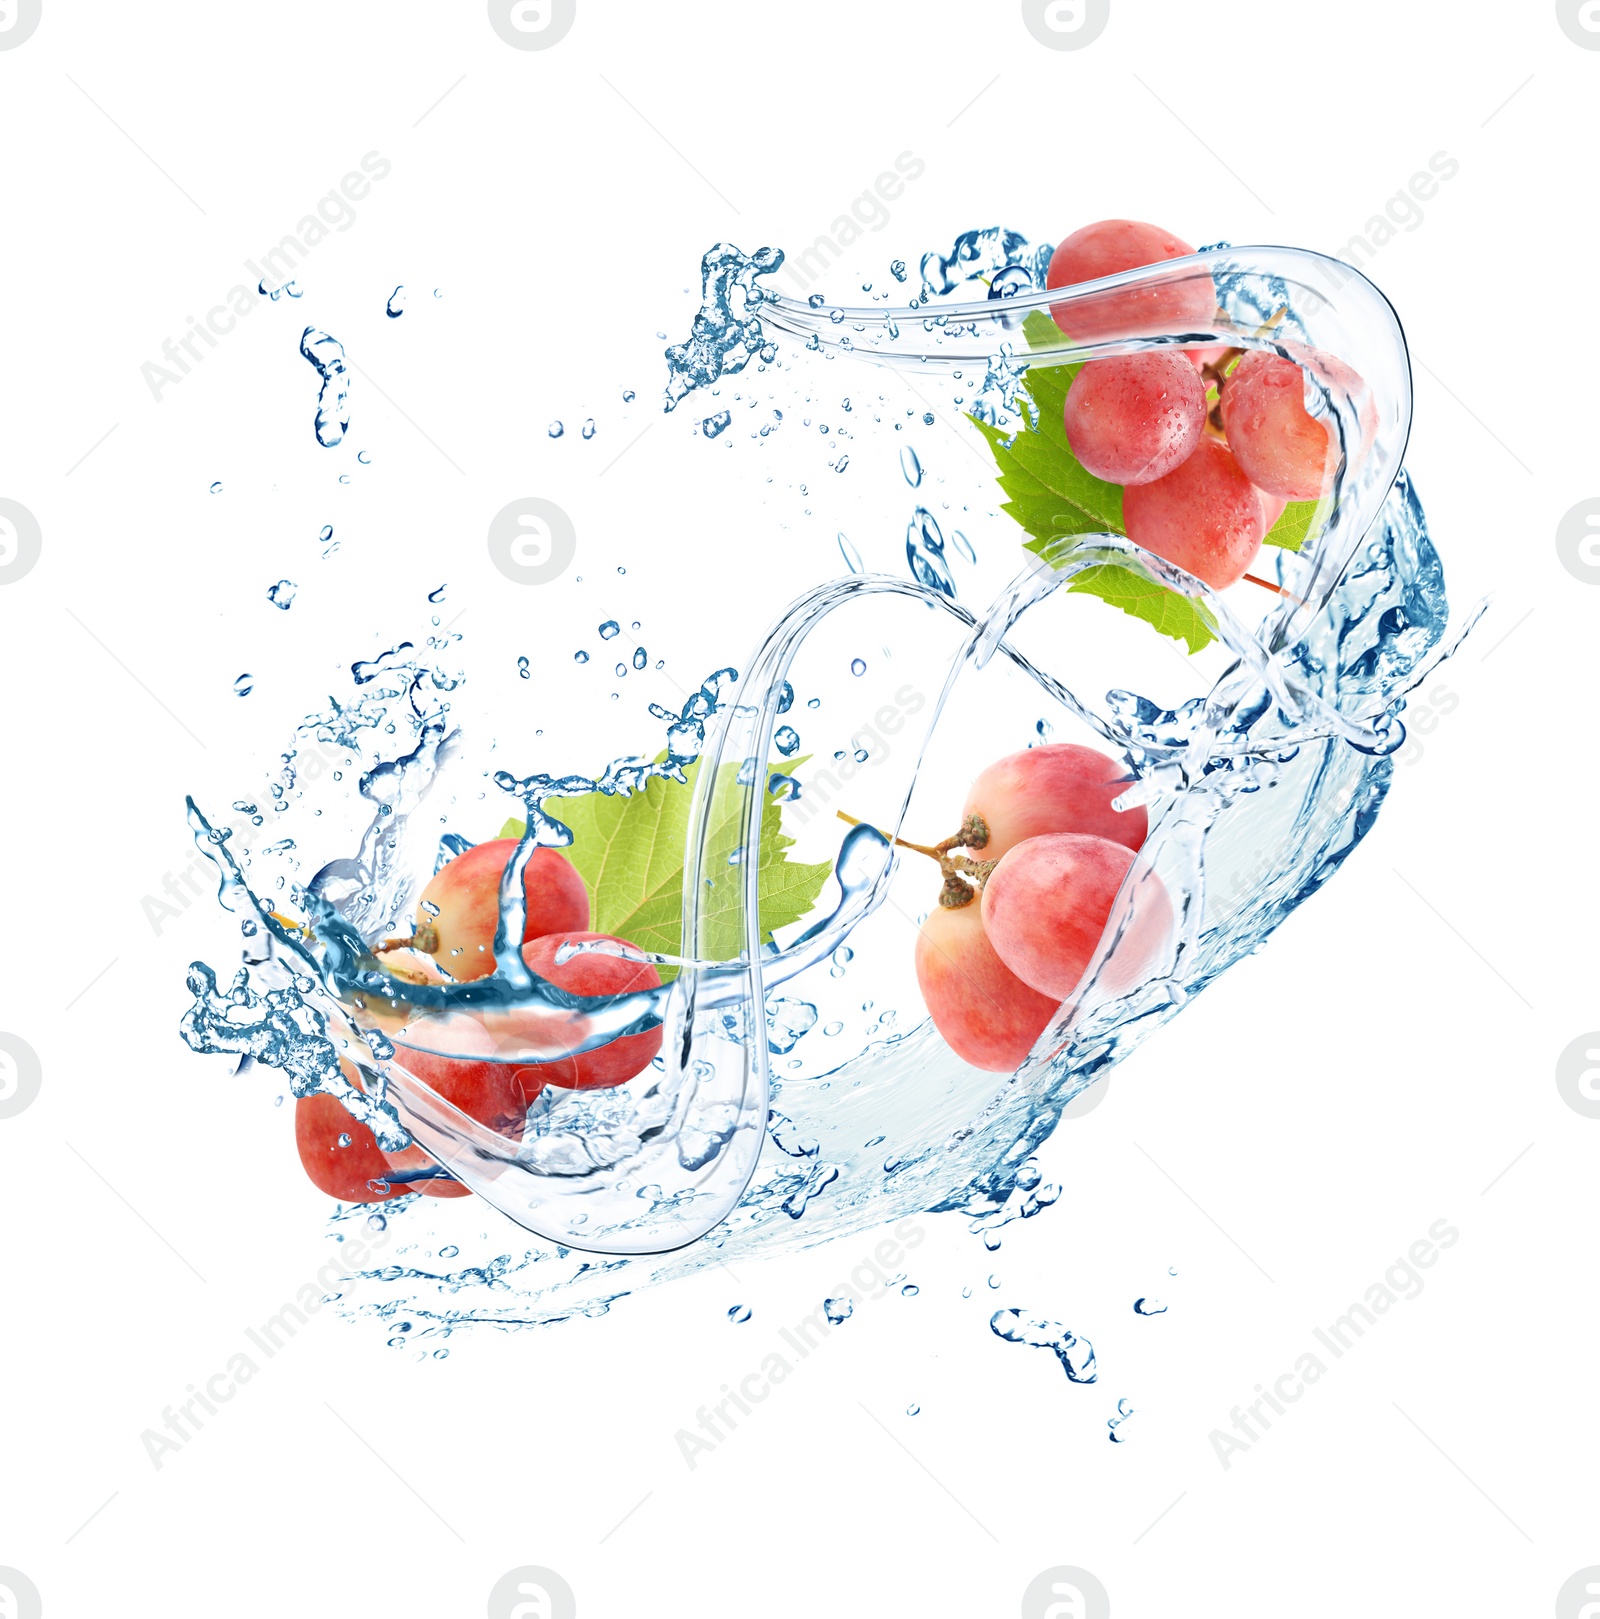 Image of Grapes with water splash on white background